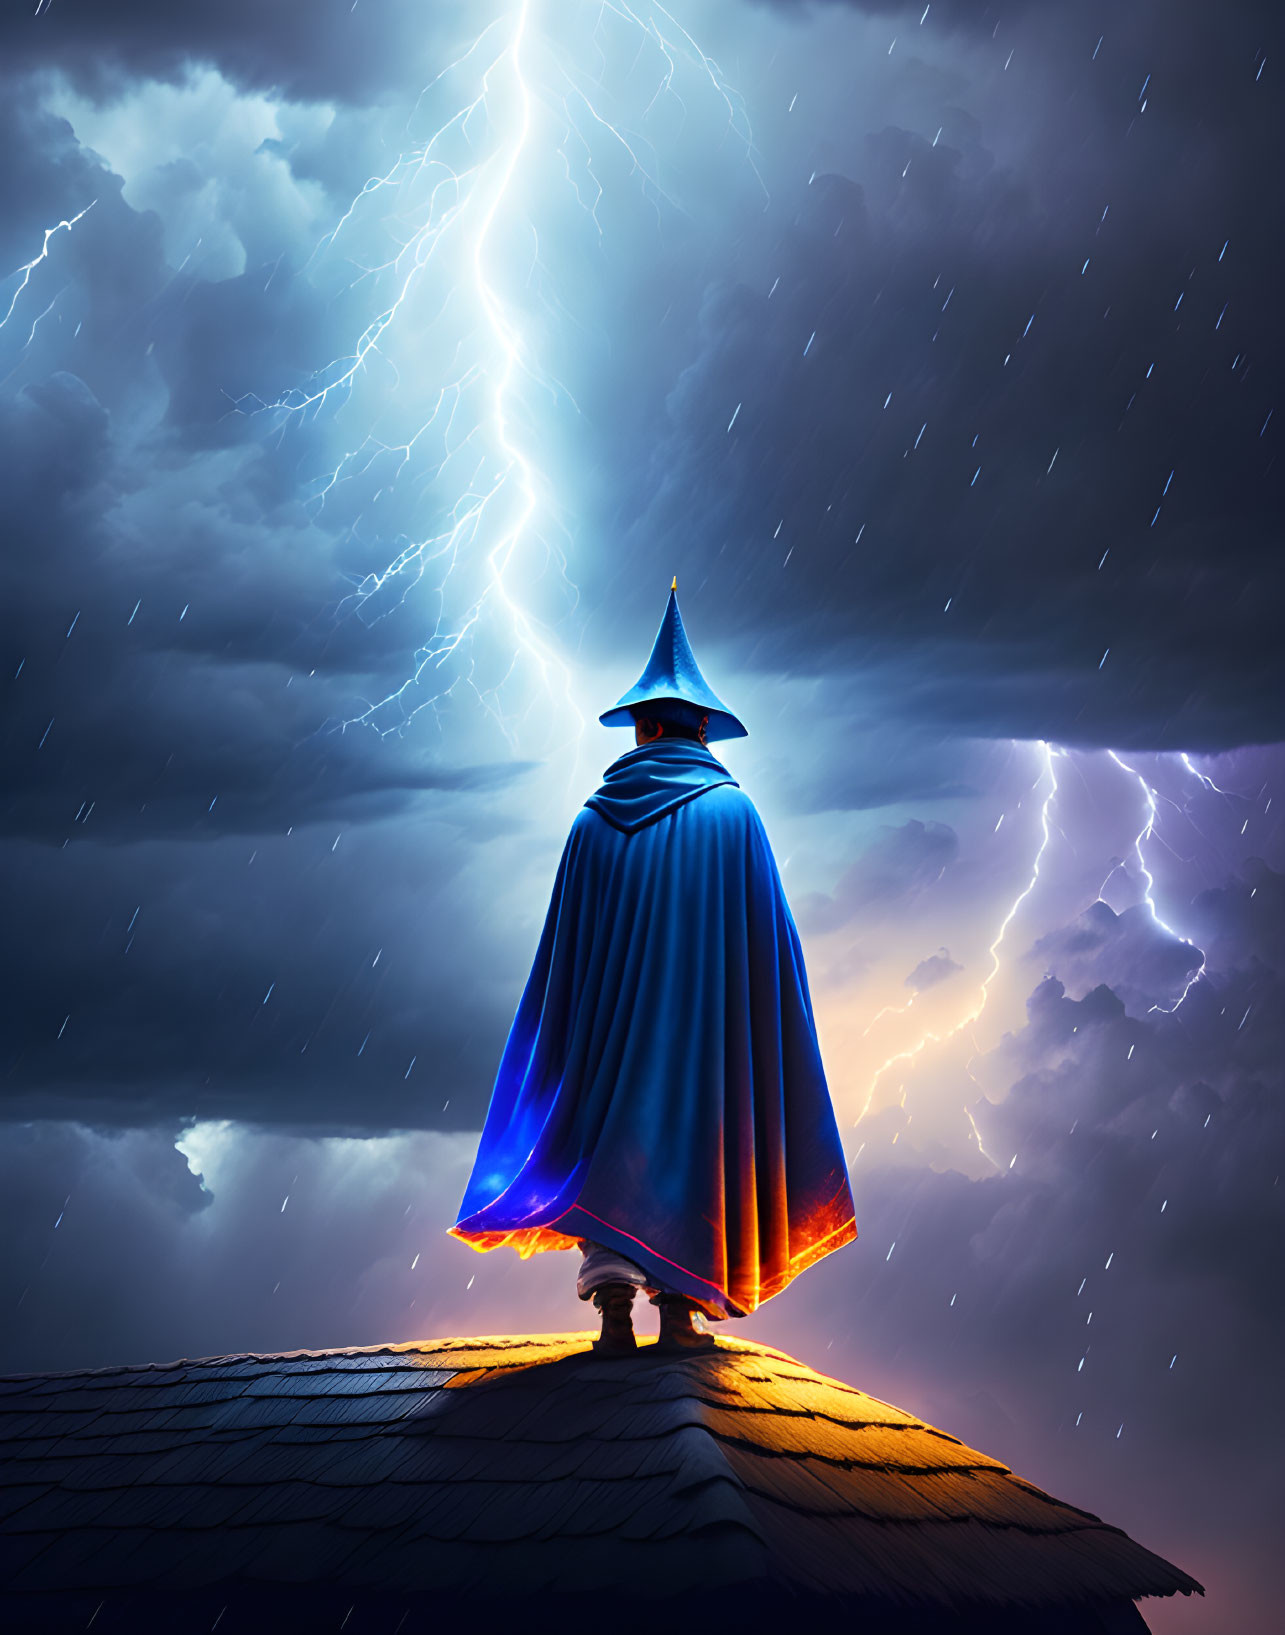 Wizard in Blue Cloak on Roof under Stormy Sky with Lightning